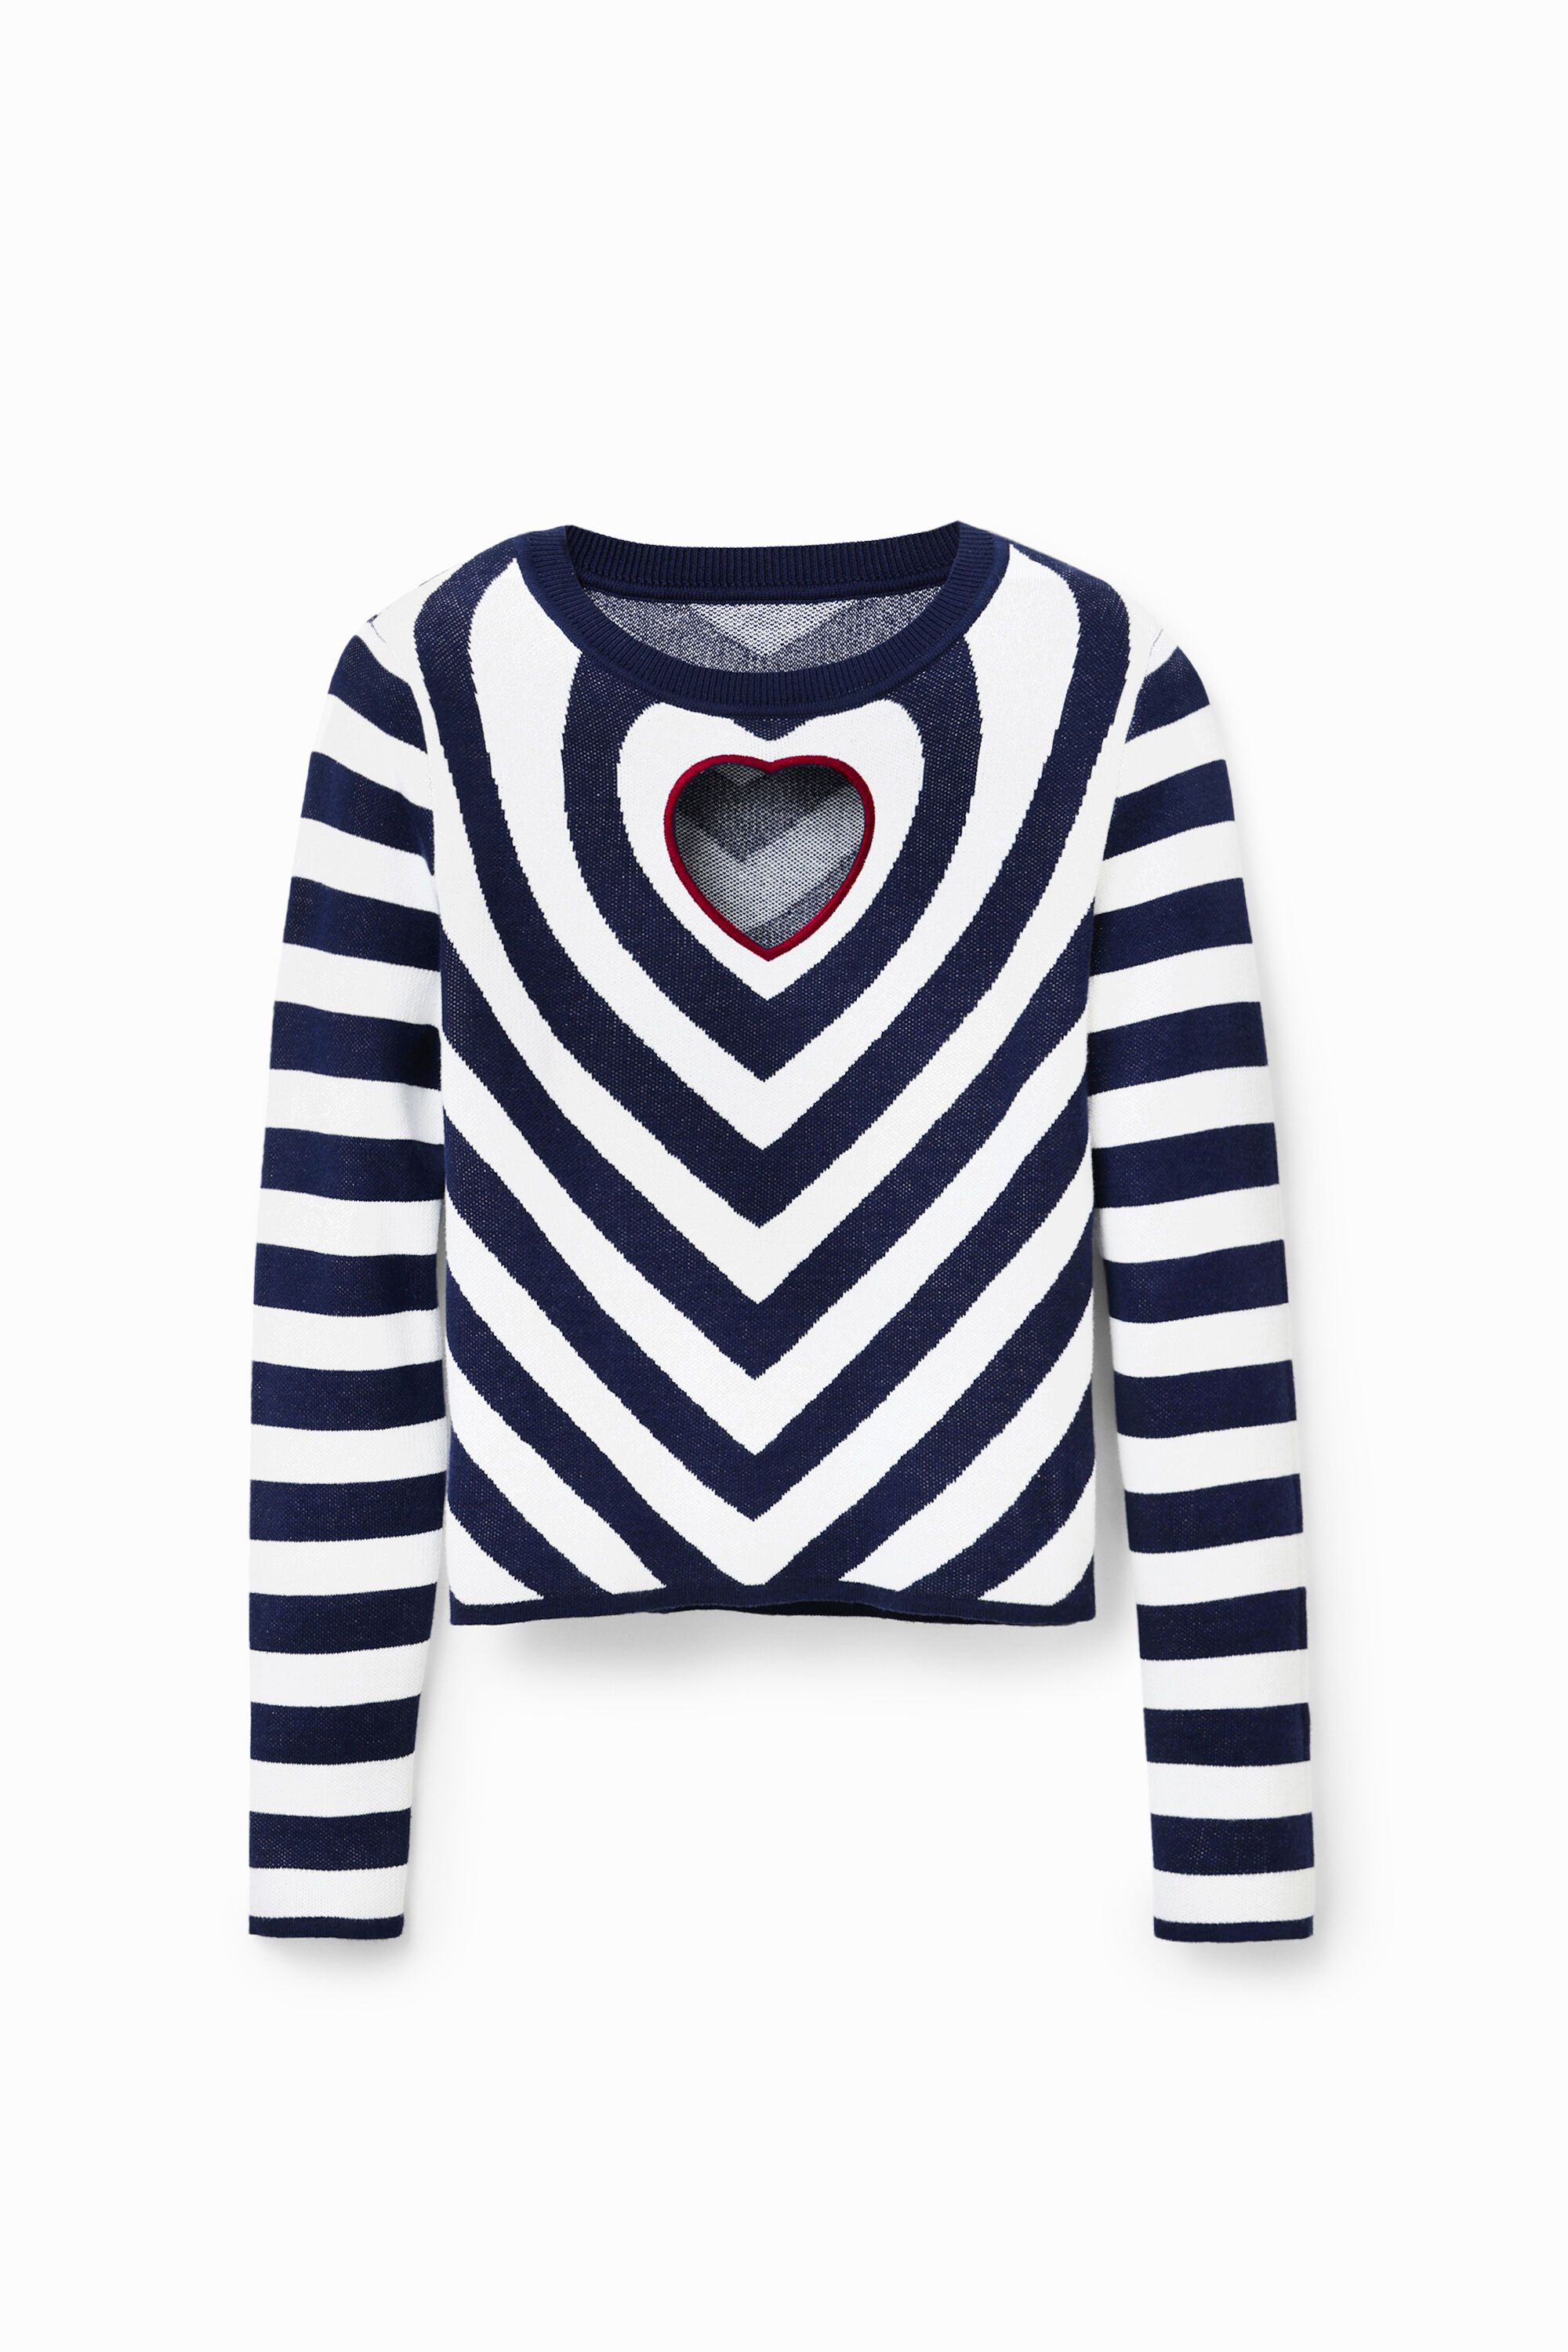 Desigual Striped heart cut-out pullover